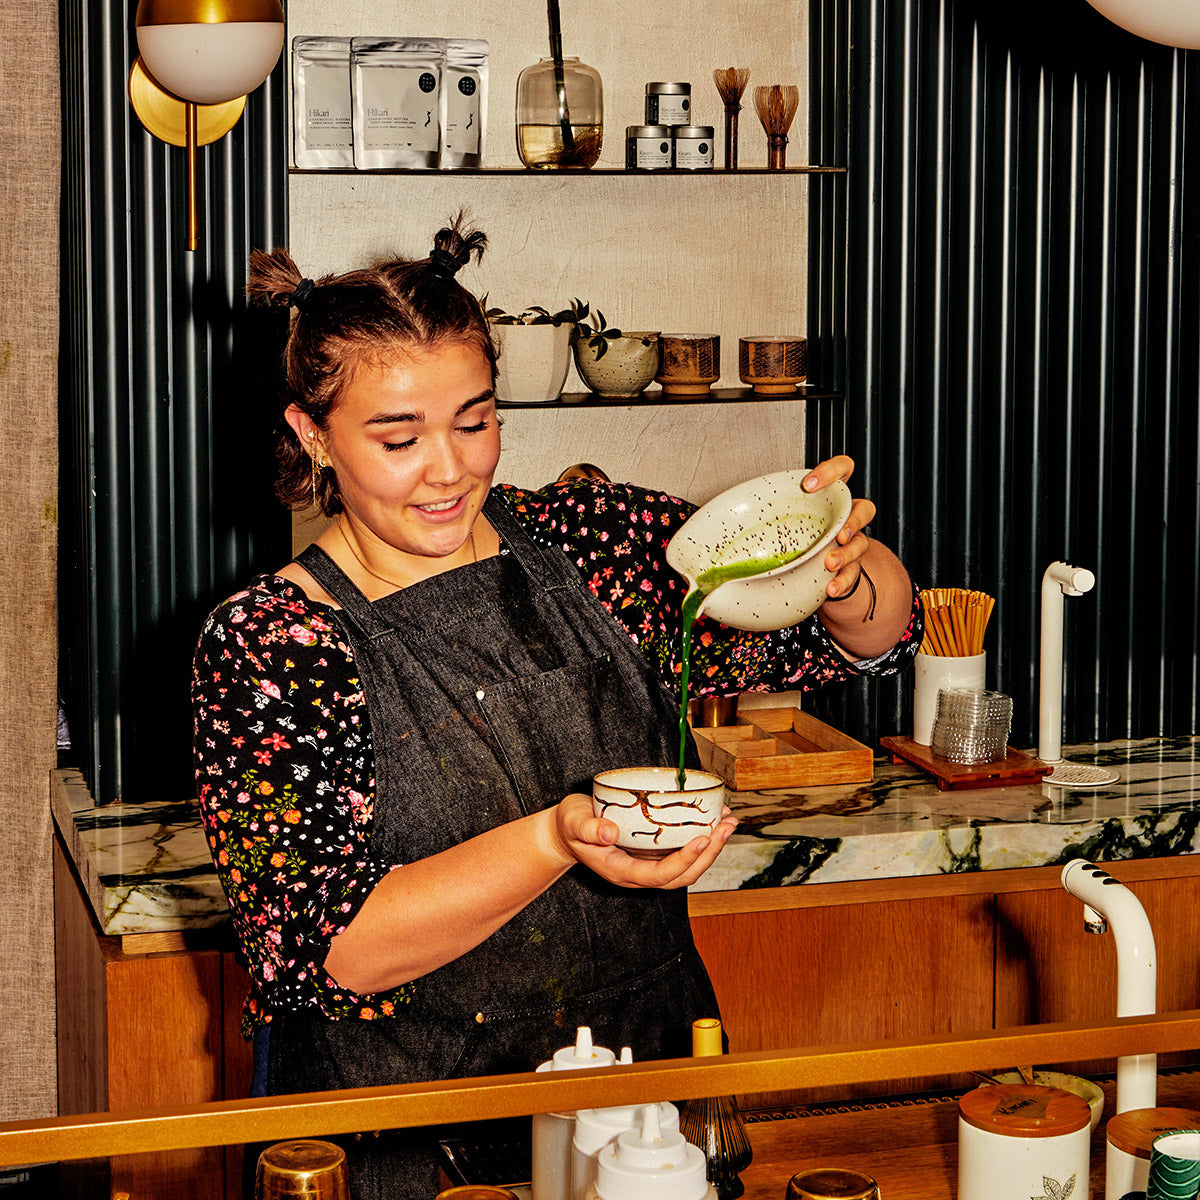 Interior of Nolita café, barista pouring matcha from a speckled white ceramic whisking bowl into a ceramic tea bowl with golden glaze in a root-like pattern